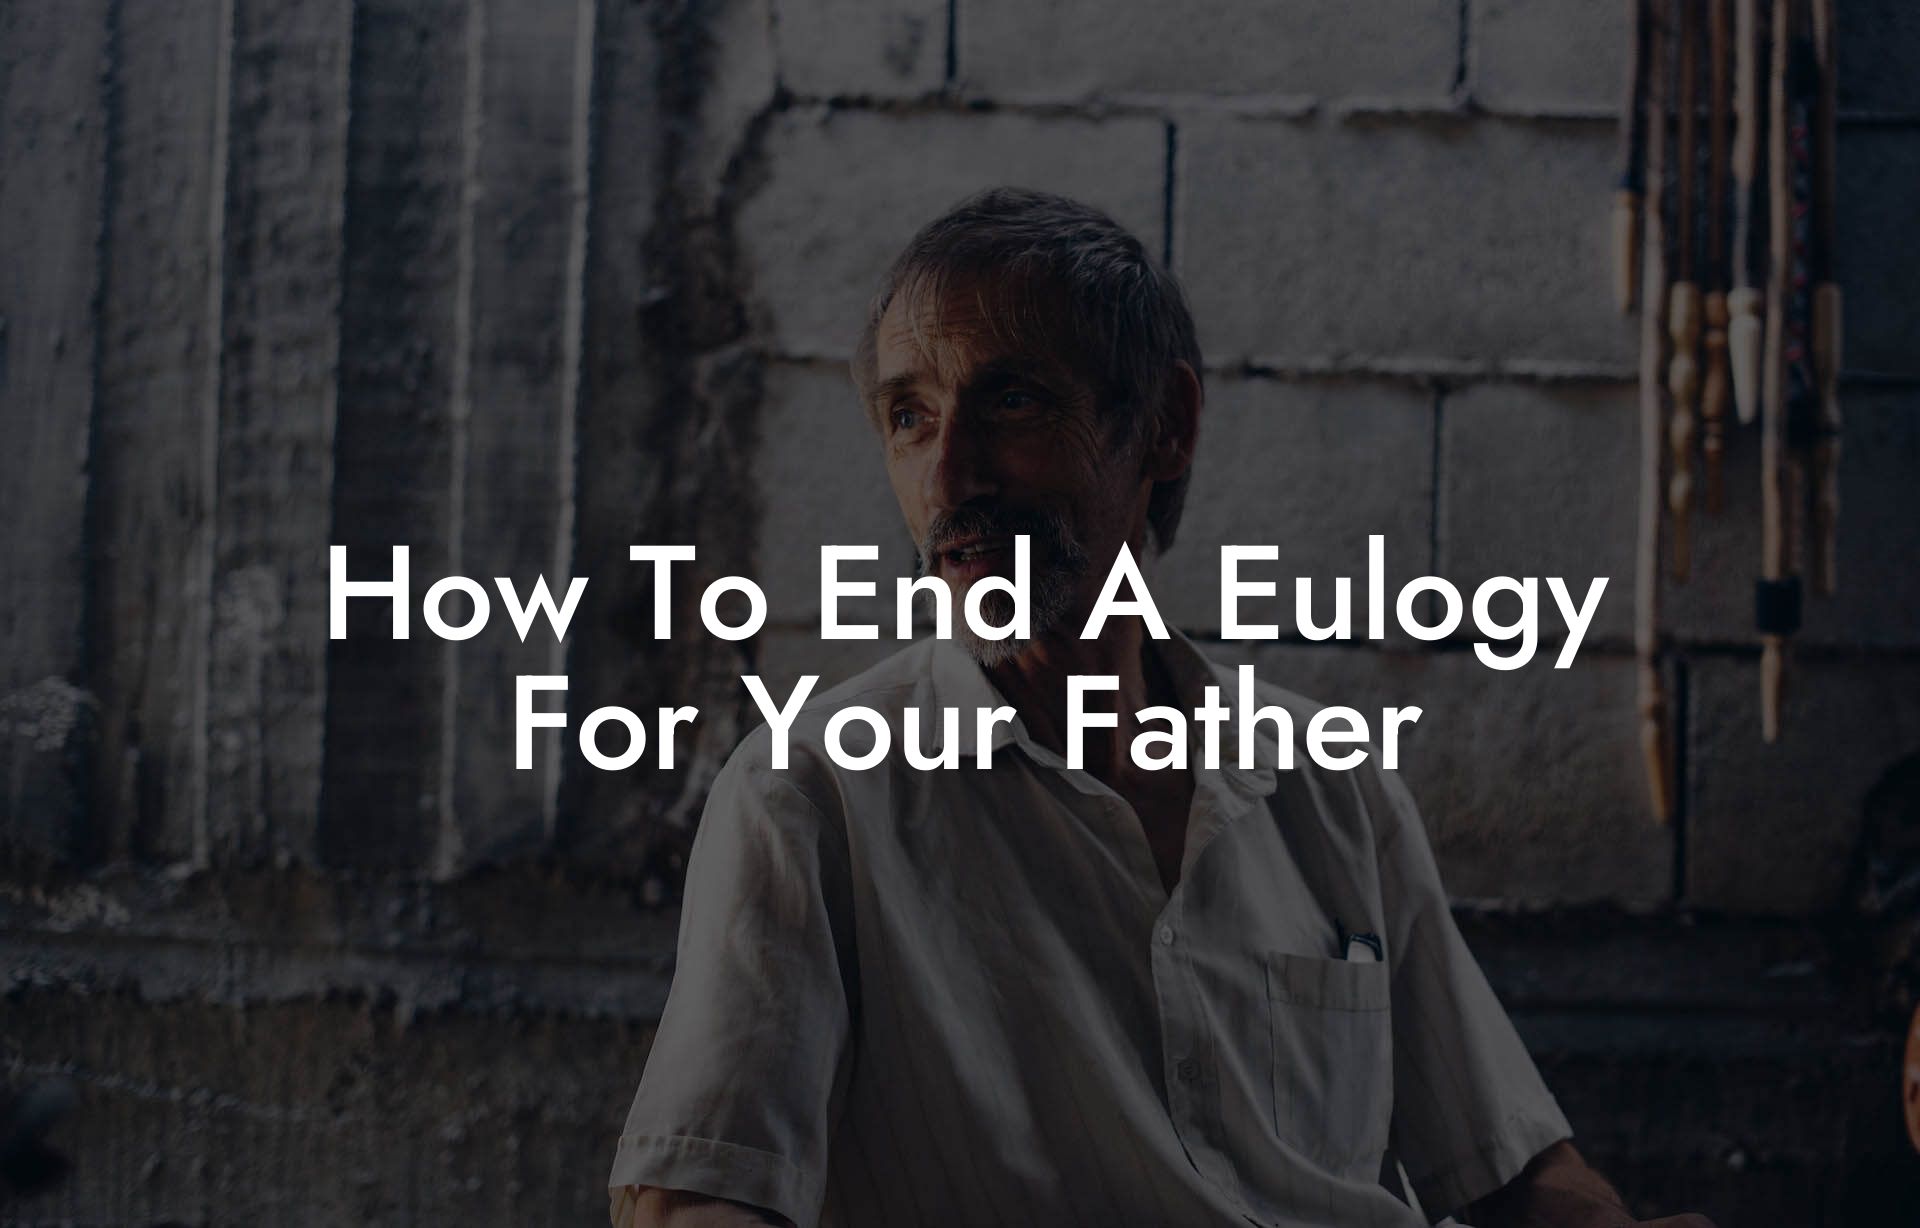 How To End A Eulogy For Your Father